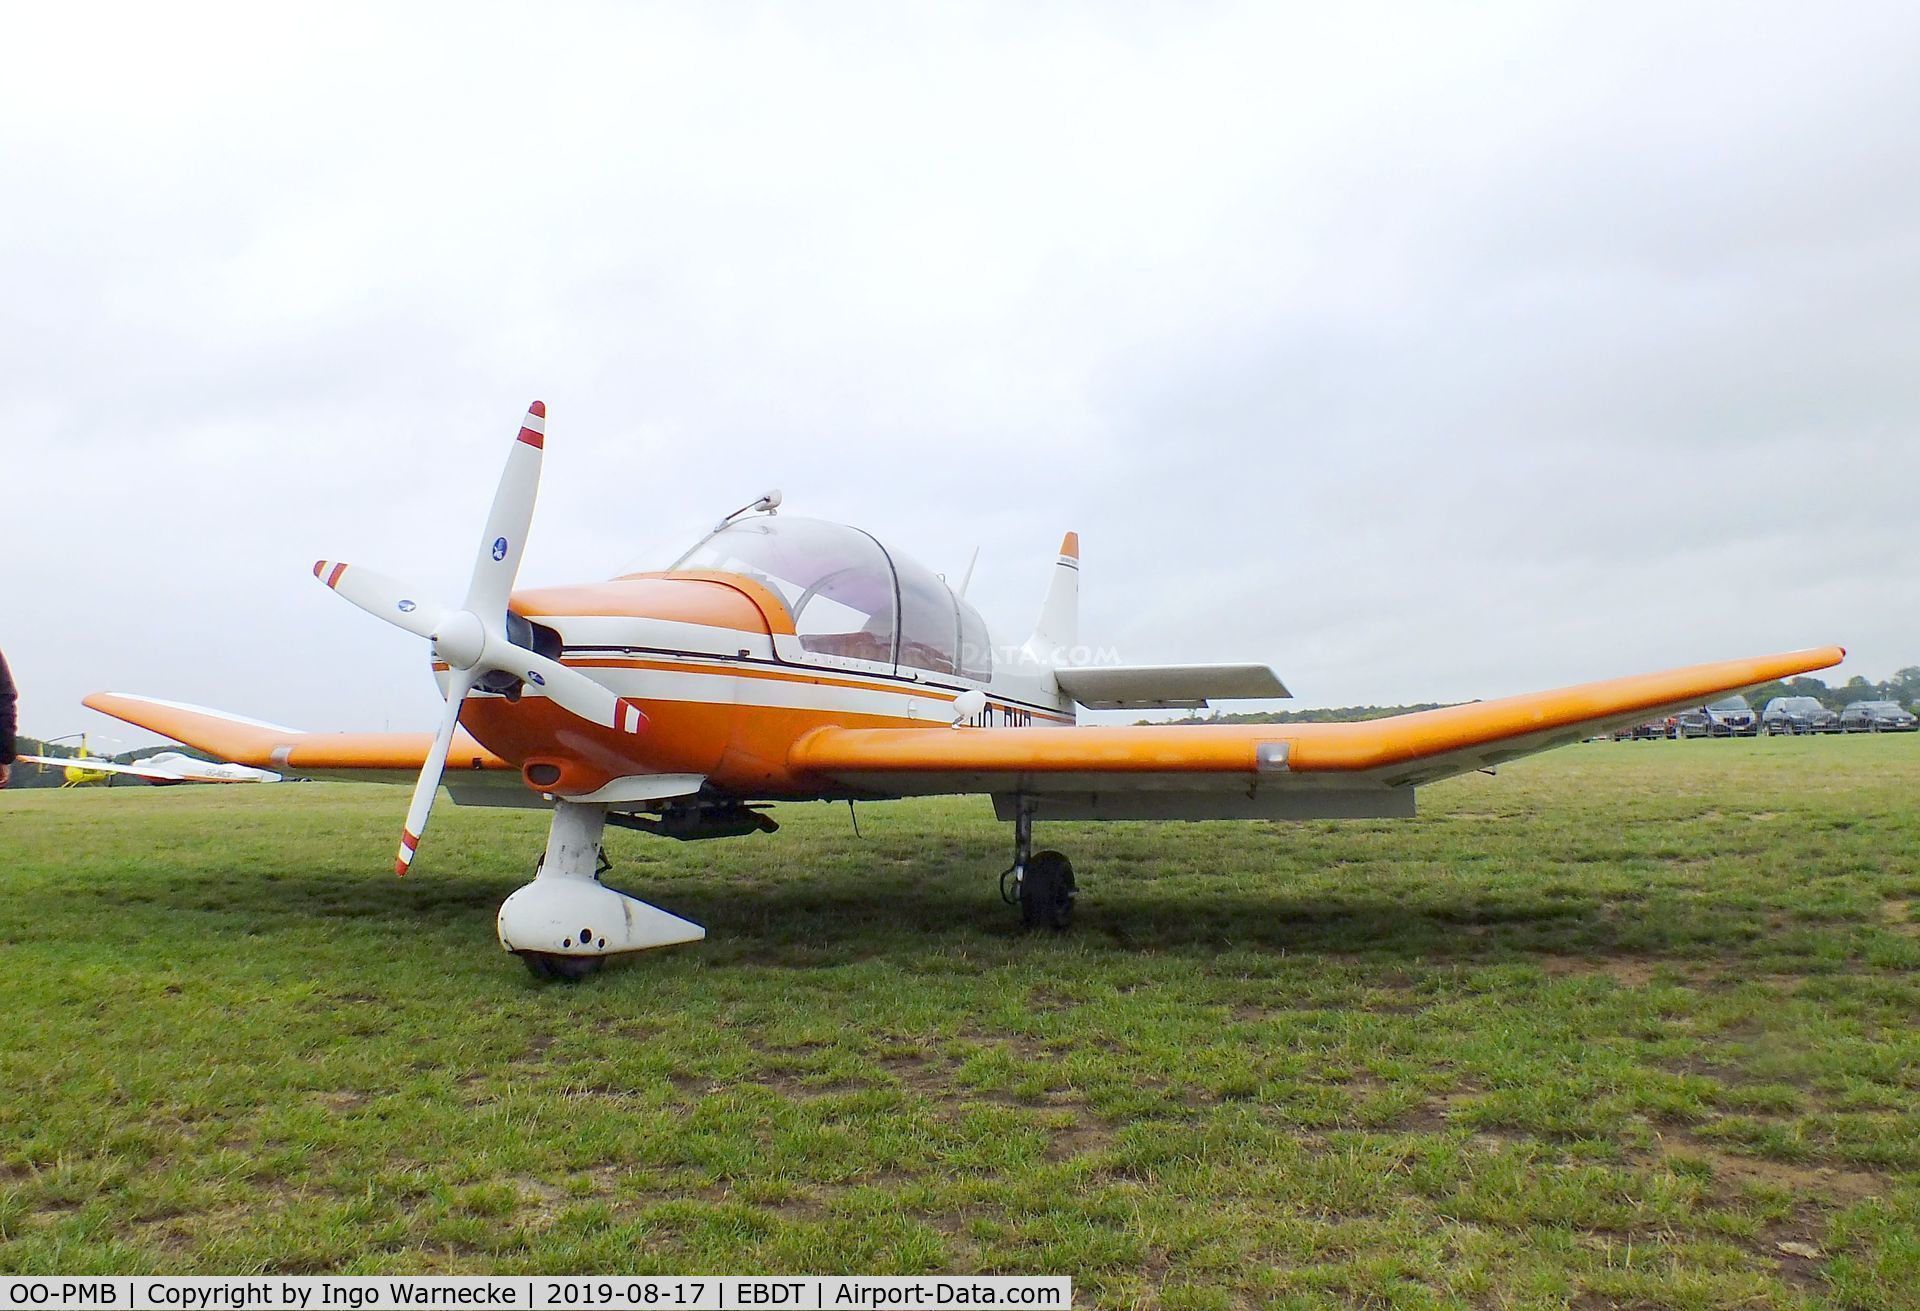 OO-PMB, 1978 Robin DR-400-180R Remorqueur Regent C/N 1366, Robin DR.400-180R Remorqueur at the 2019 Fly-in at Diest/Schaffen airfield